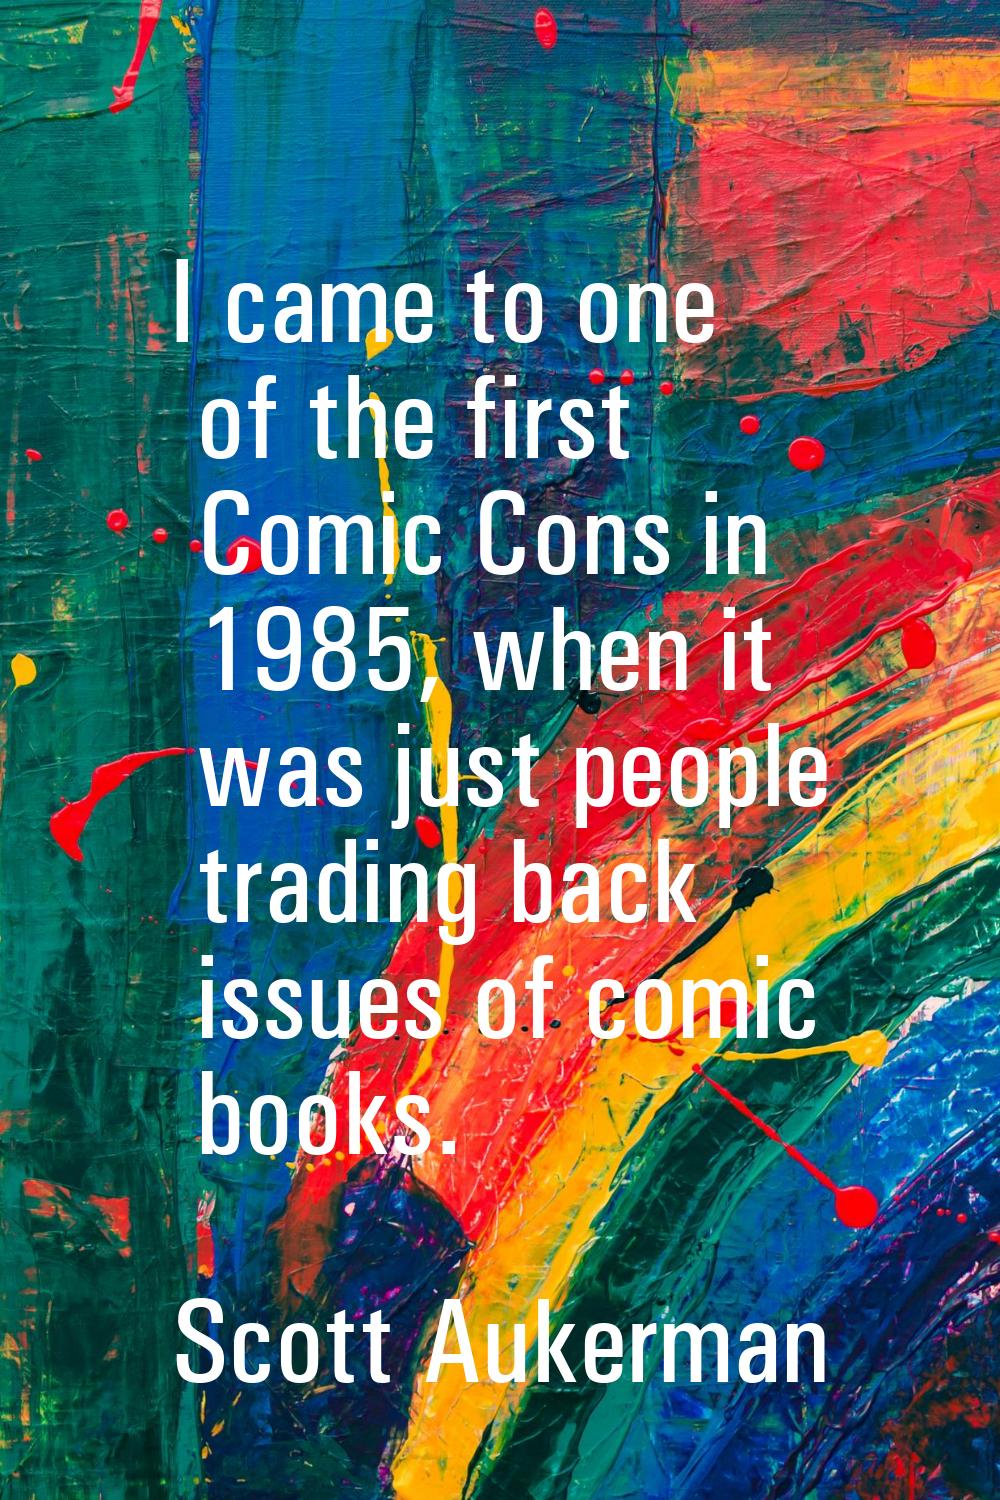 I came to one of the first Comic Cons in 1985, when it was just people trading back issues of comic